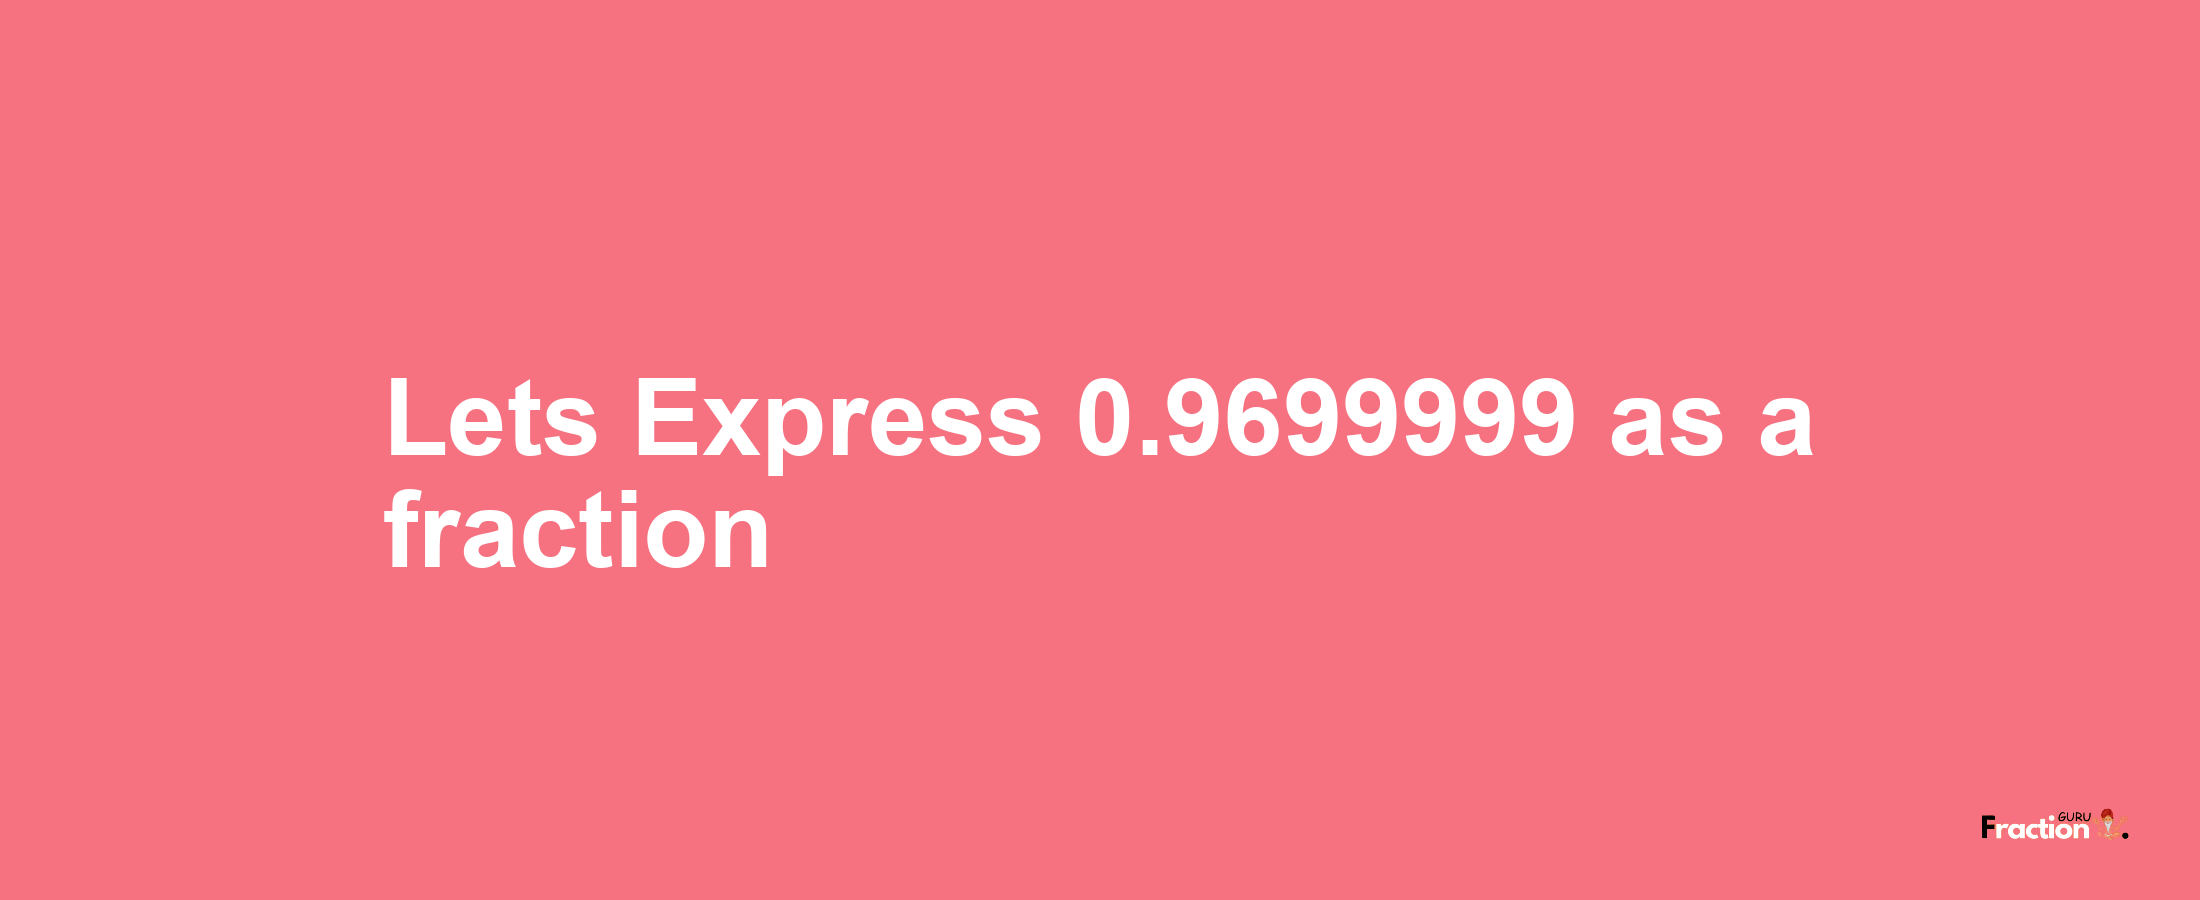 Lets Express 0.9699999 as afraction